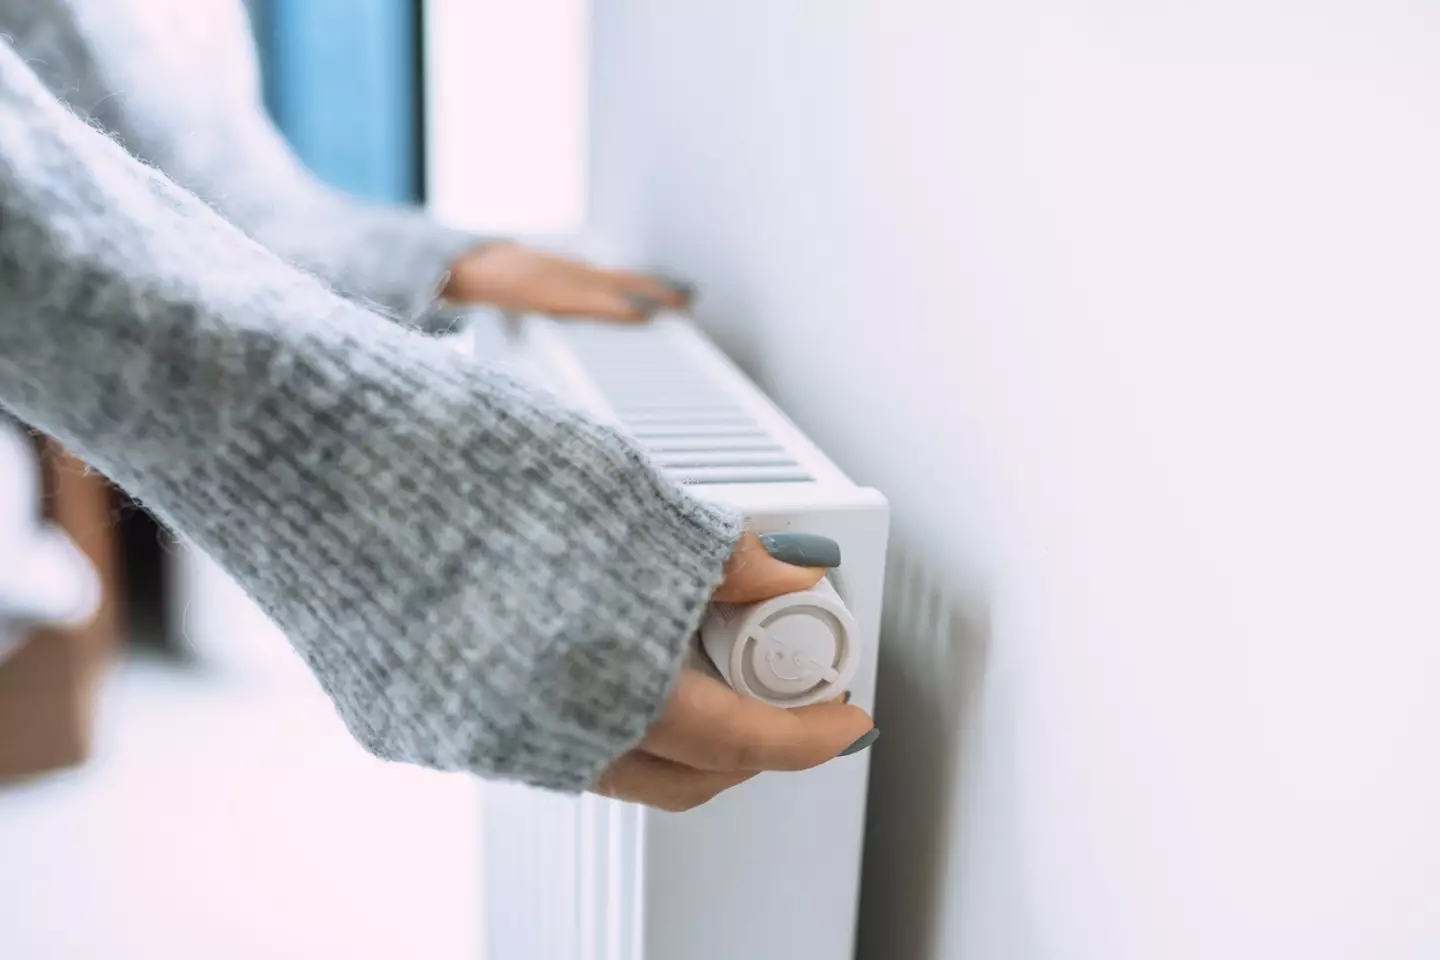 You don't have to have your heating on very high to deter condensation and mould, experts say.